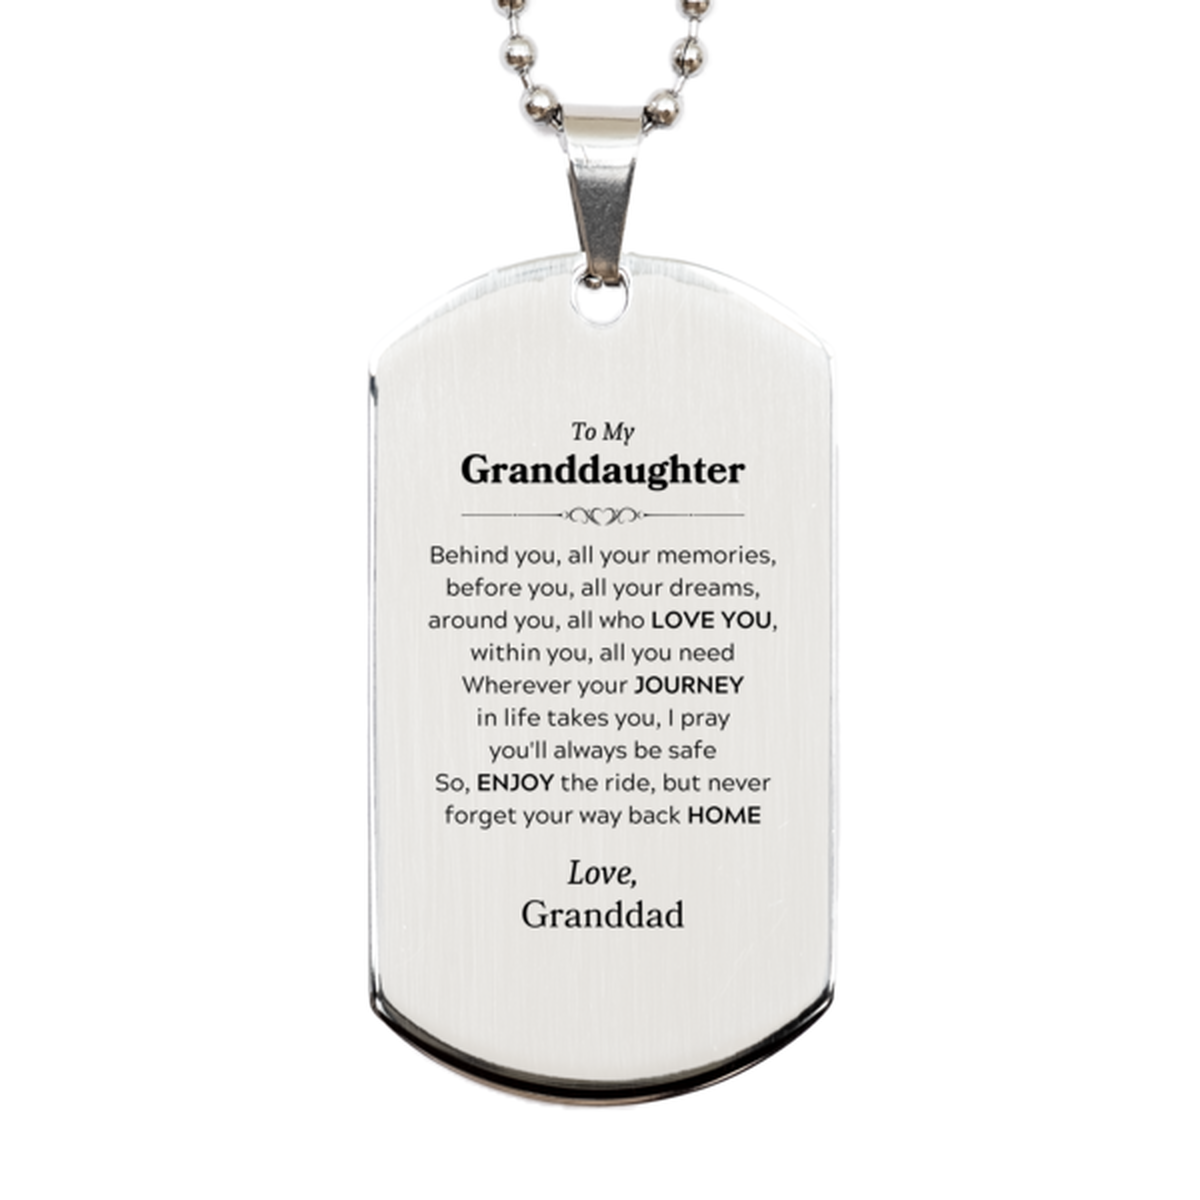 To My Granddaughter Graduation Gifts from Granddad, Granddaughter Silver Dog Tag Christmas Birthday Gifts for Granddaughter Behind you, all your memories, before you, all your dreams. Love, Granddad